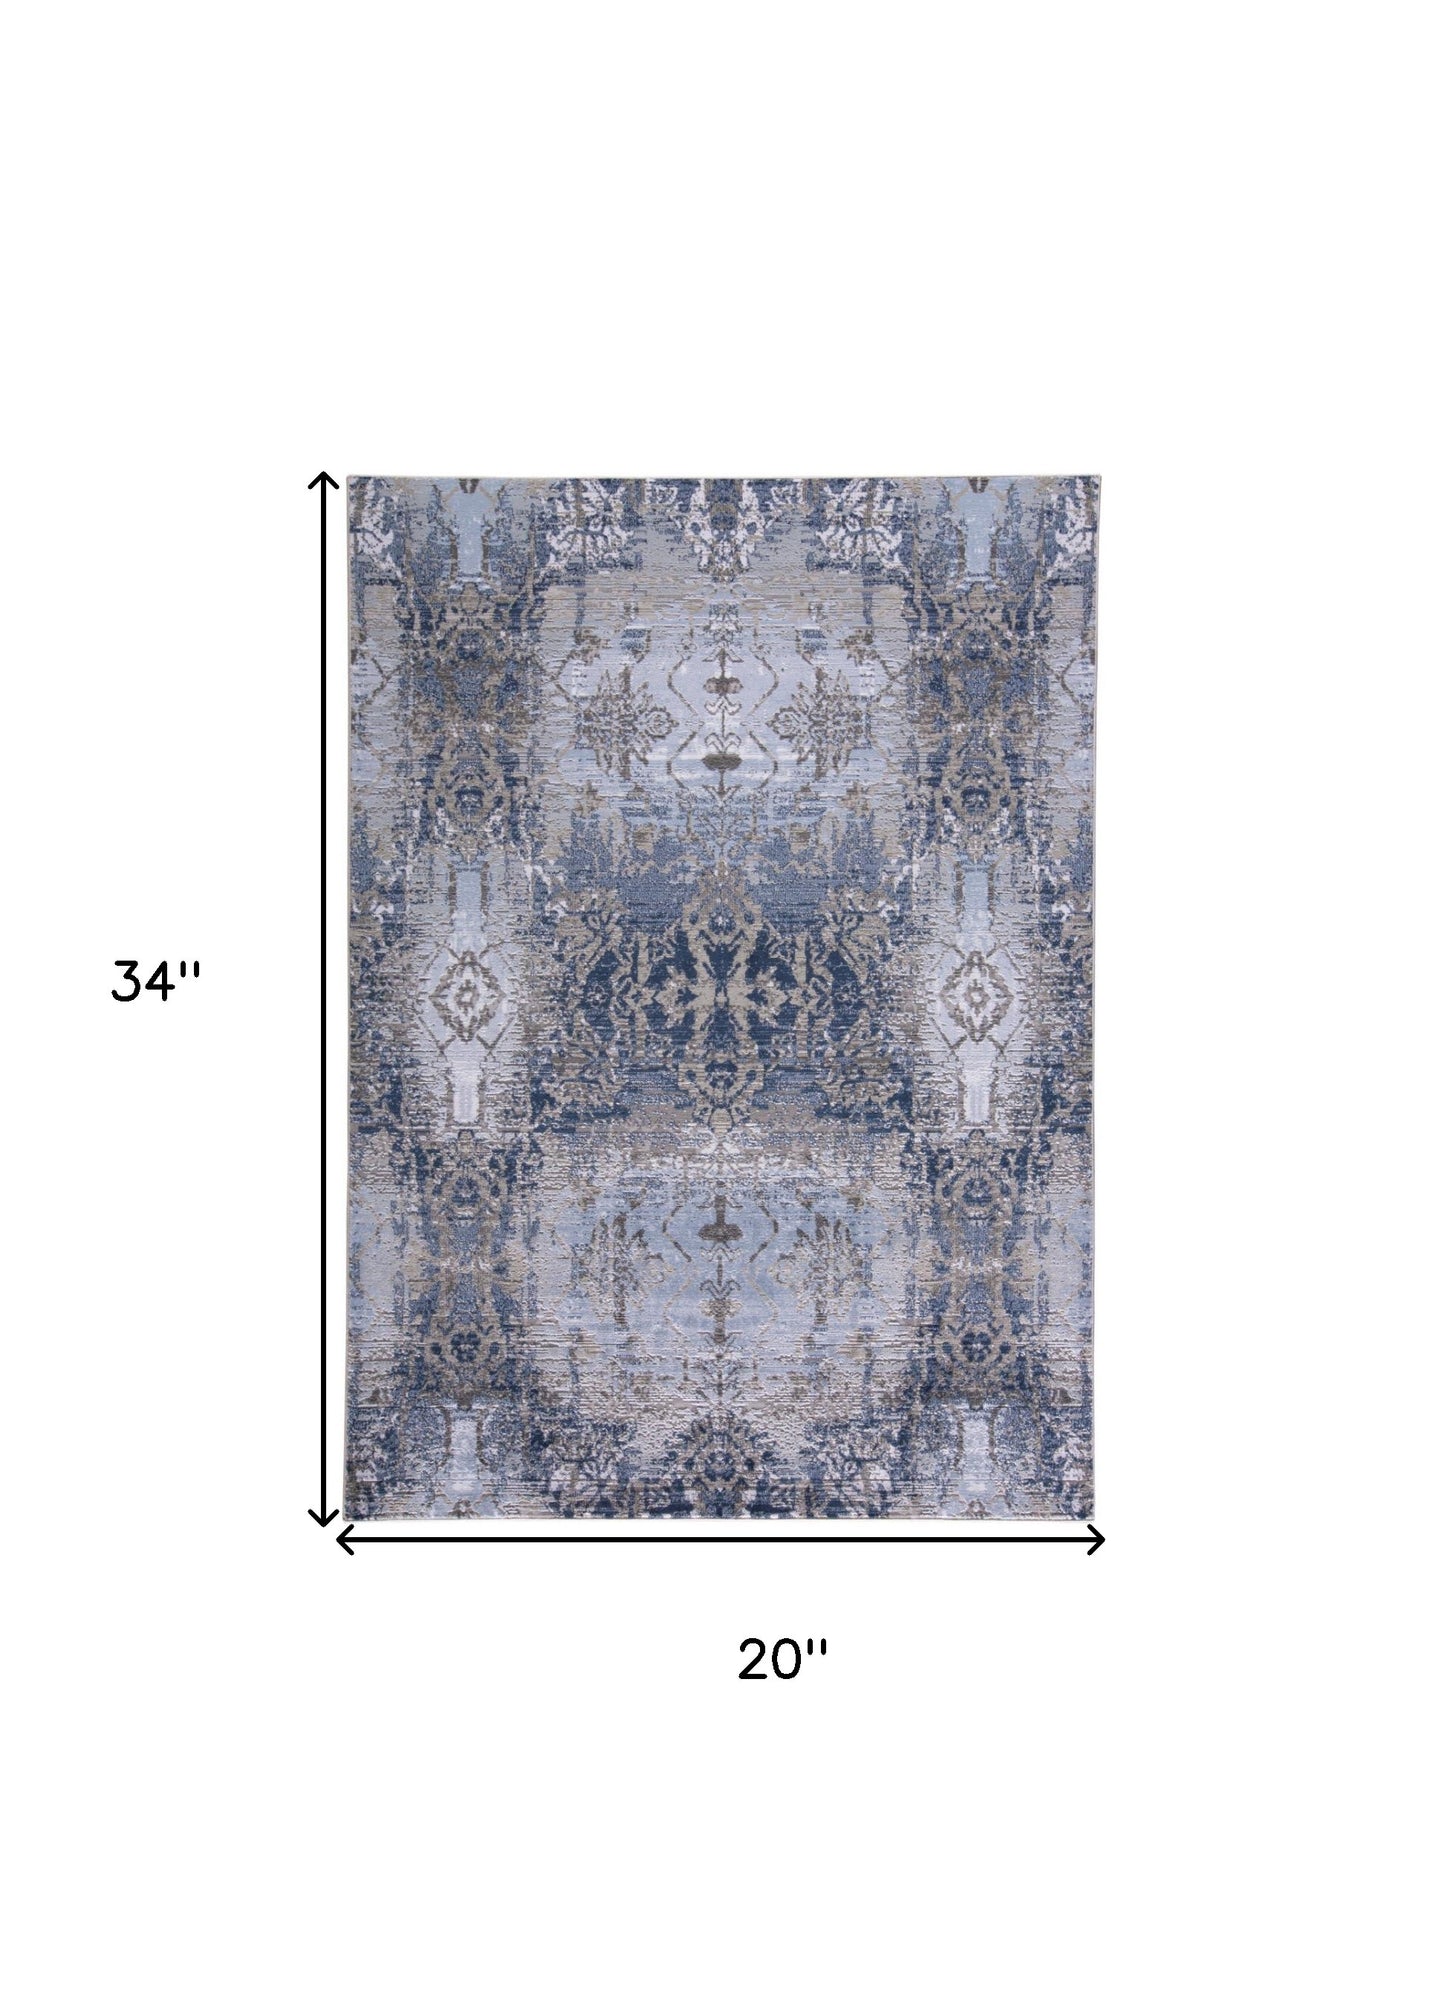 5' X 7' Blue Gray And Taupe Abstract Stain Resistant Area Rug